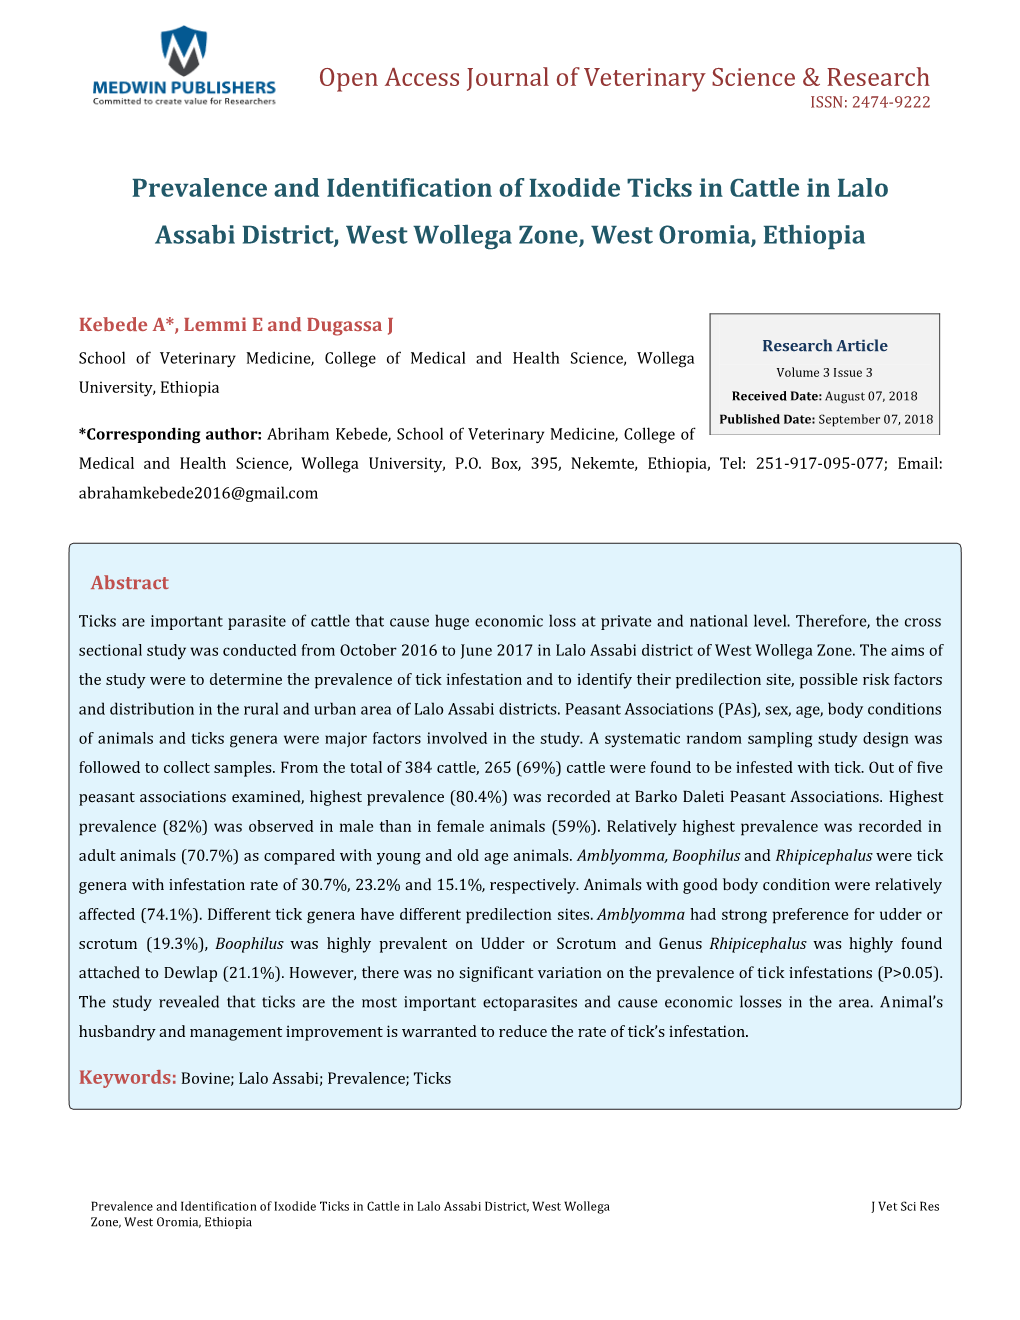 Prevalence and Identification of Ixodide Ticks in Cattle in Lalo Assabi District, West Wollega Zone, West Oromia, Ethiopia